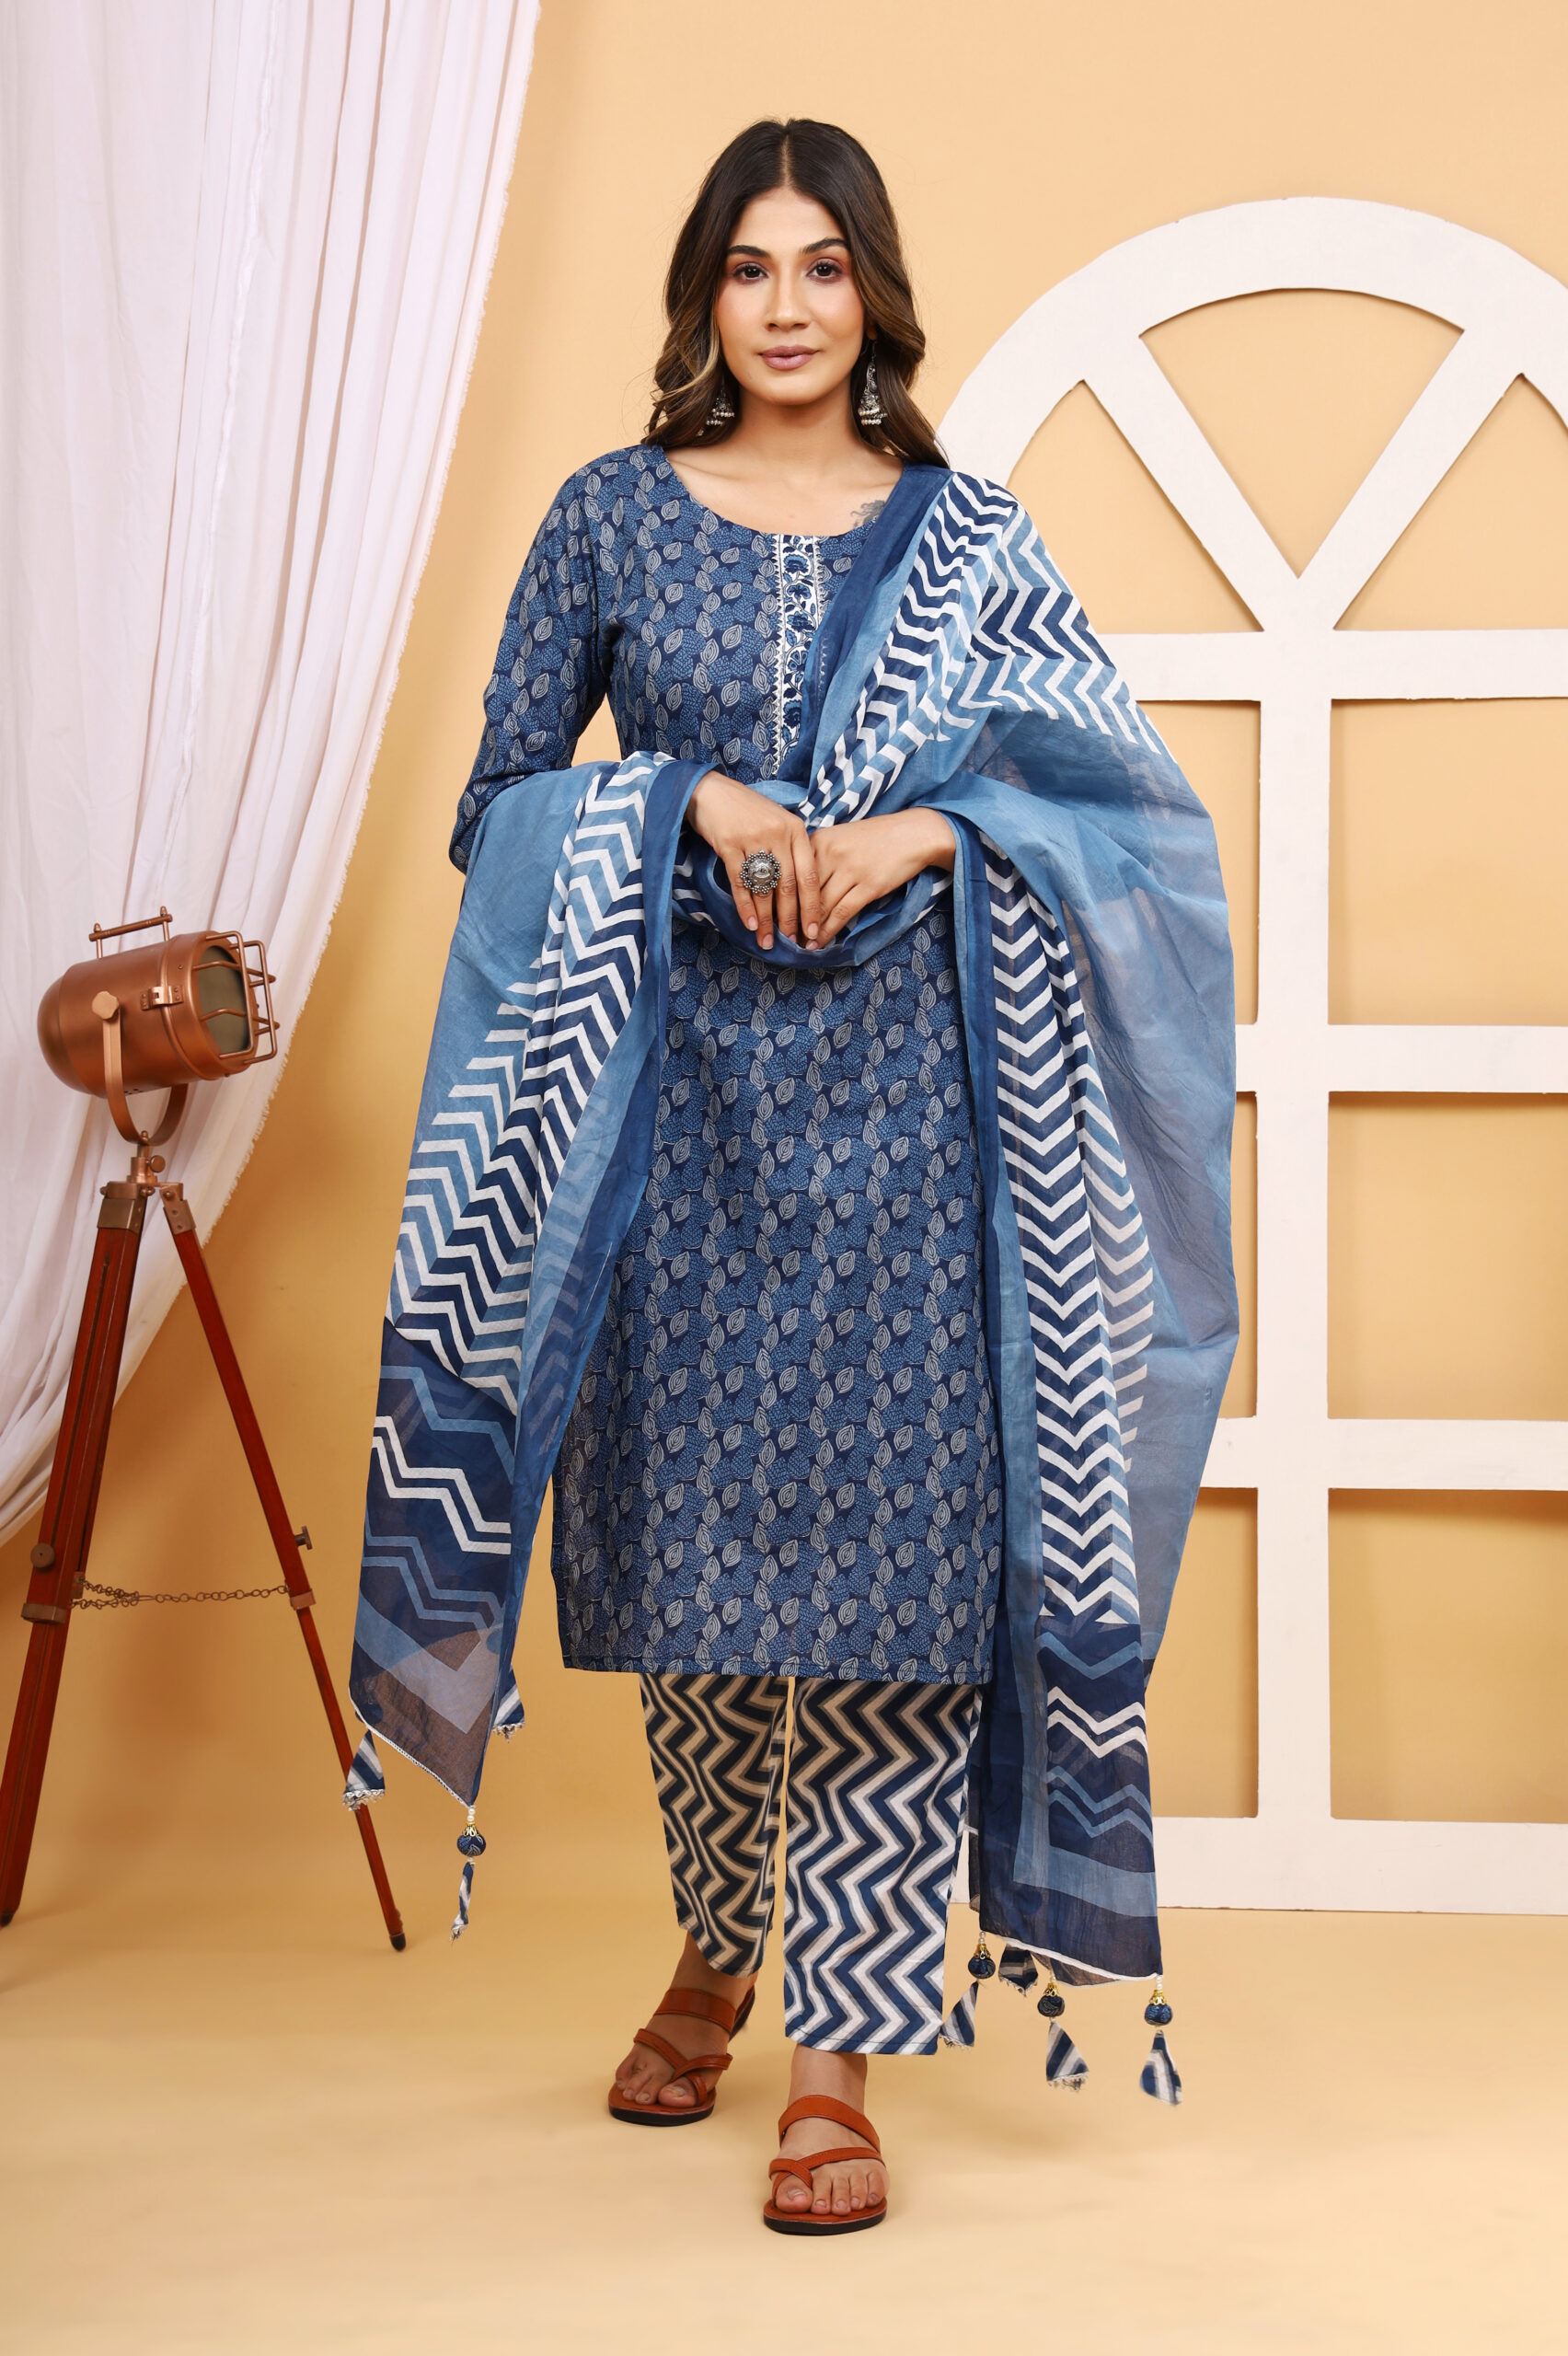 Style Passion Designer Ready made Salwar kameez Collections We would like  to introduce you the manufacturers of ladies … | Readymade salwar kameez,  Fashion, Women